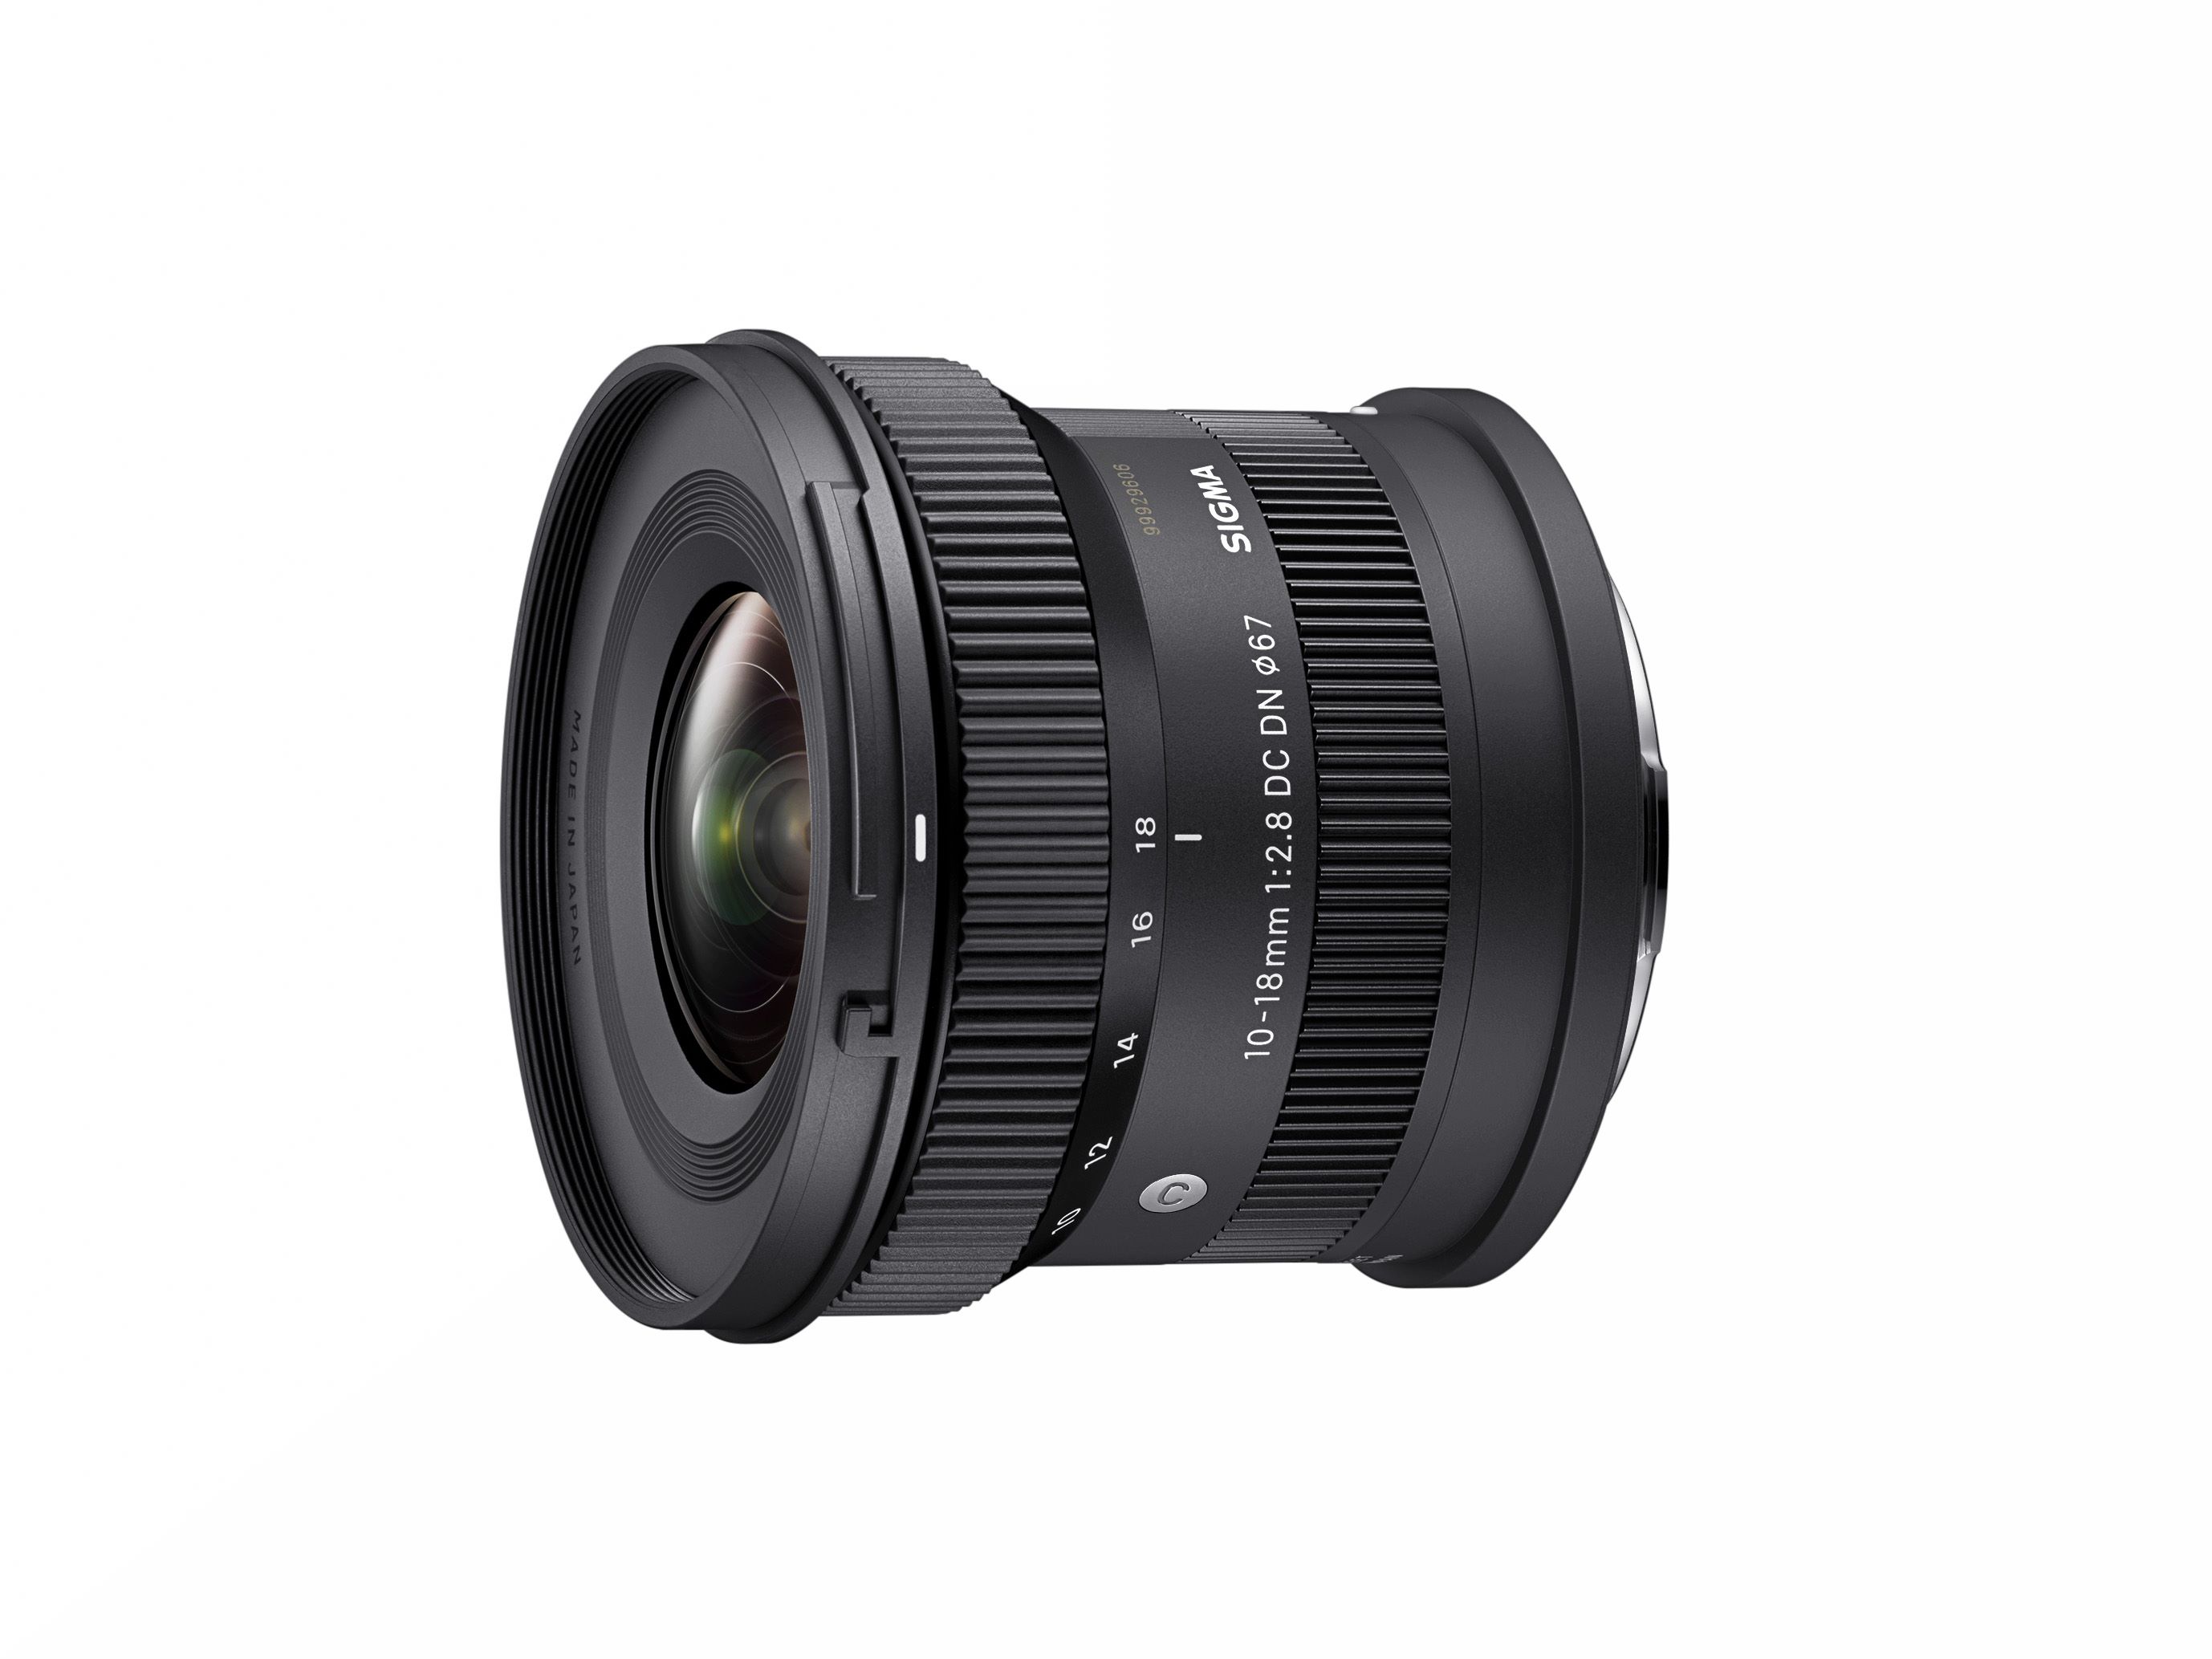 October 5, 2023. Ronkonkoma, NY - SIGMA is pleased to announce the 10-18mm F2.8 DC DN | Contemporary lens, an ultrawide zoom lens with constant F2.8 aperture for APS-C mirrorless camera systems. Offered in Sony E-mount, L mount and Fujifilm X Mount, the lens will be available late October 2023 for $599 through authorized retailers.